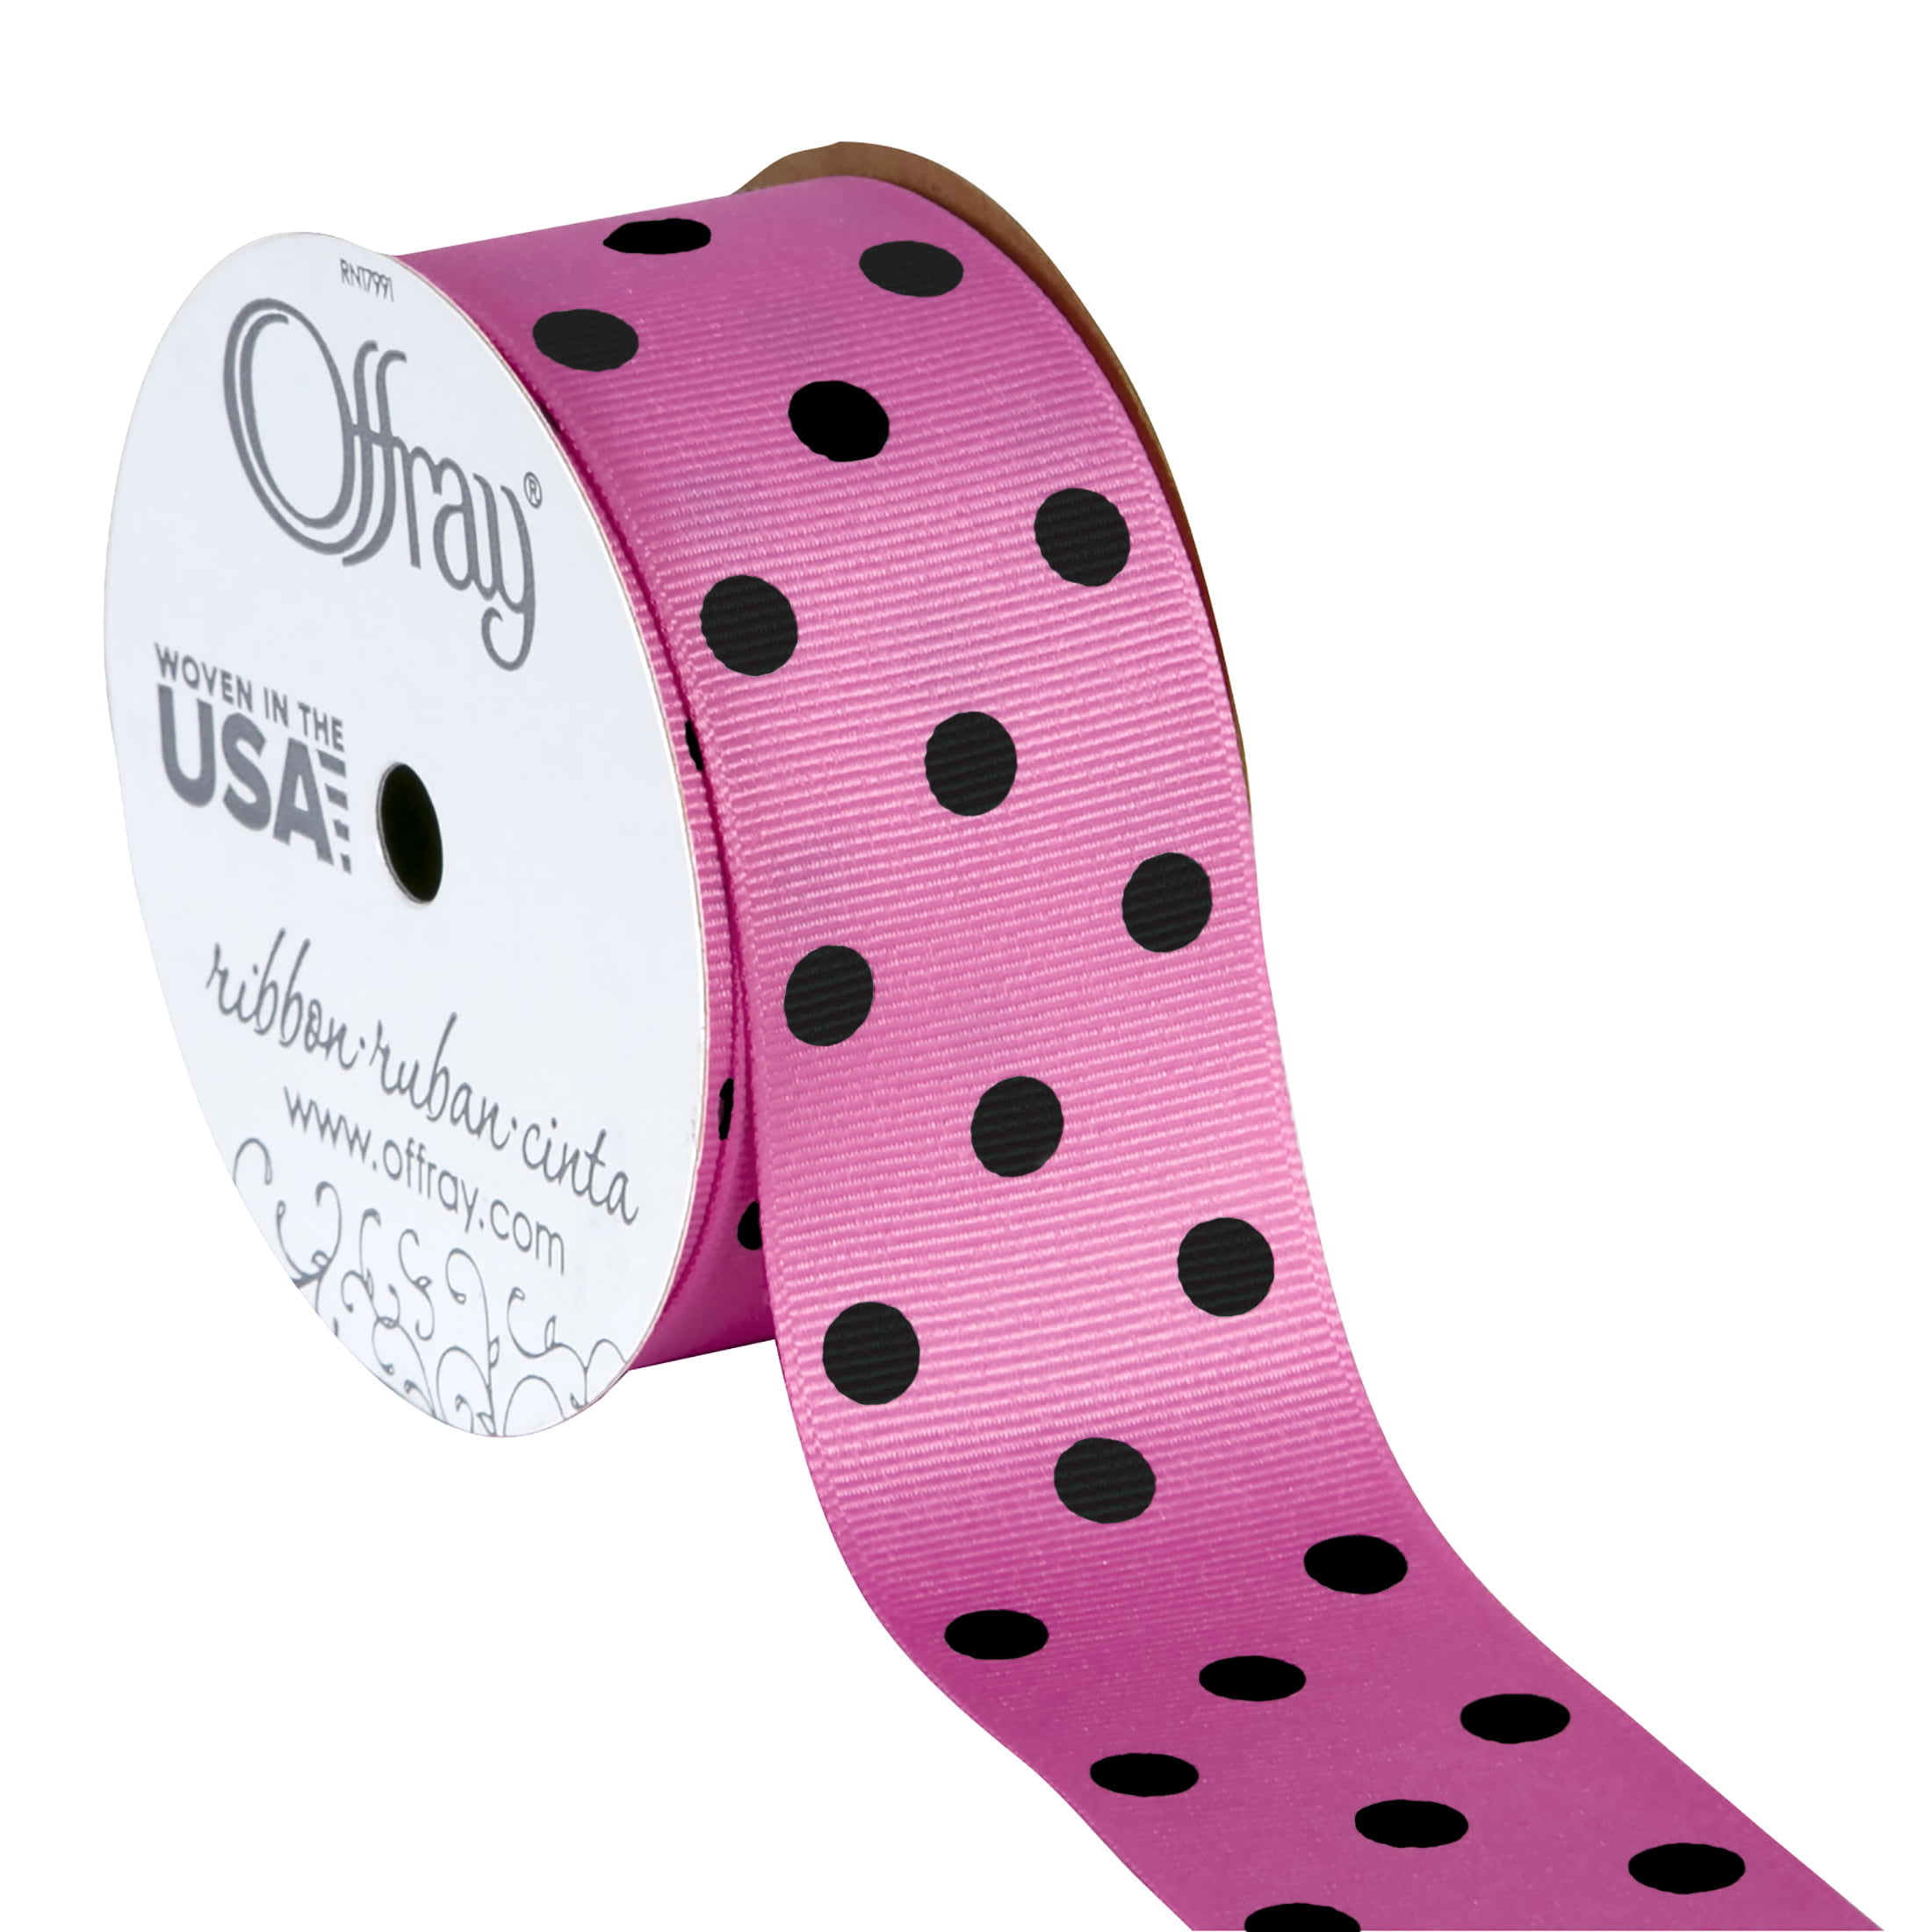 Offray Ribbon, Pink 1 1/2 inch Wired Sheer Ribbon for Floral